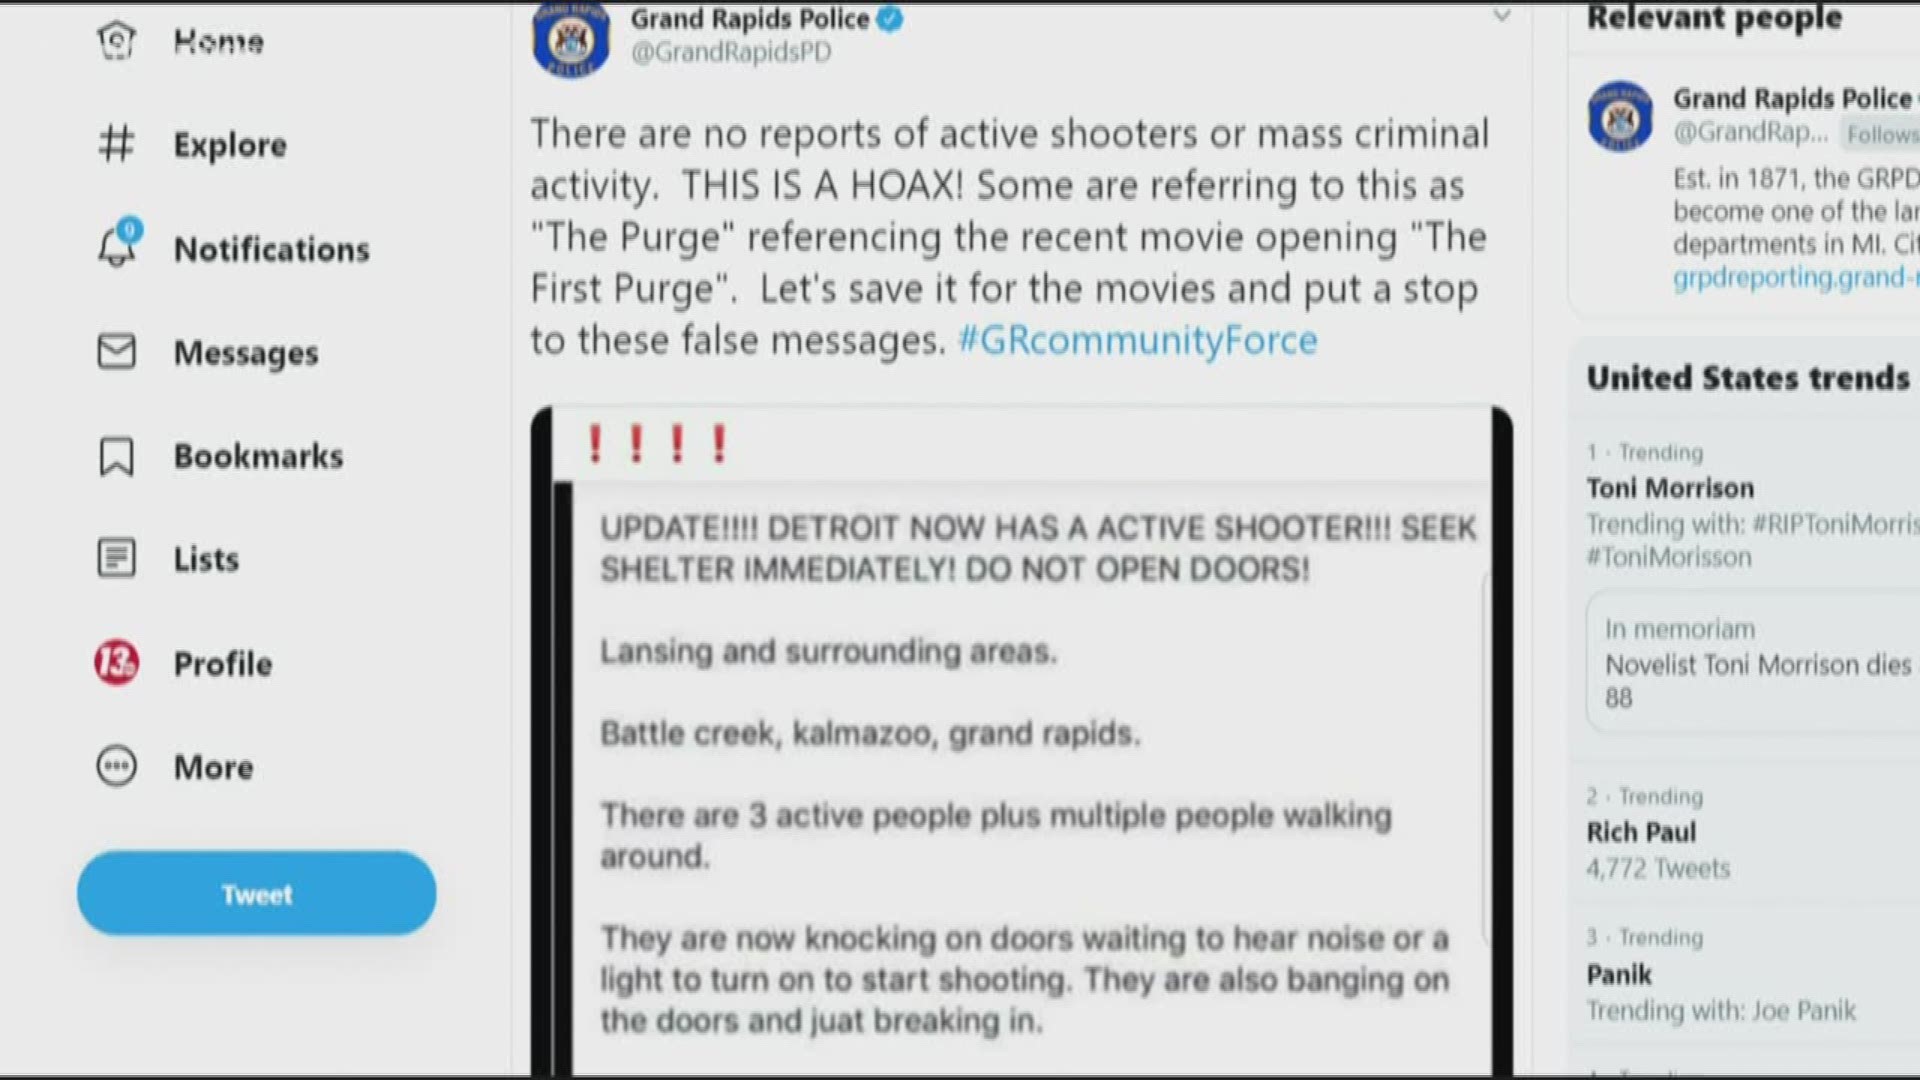 A recent post has been circulating on social media causing a stir in communities, but police are calling it a hoax.